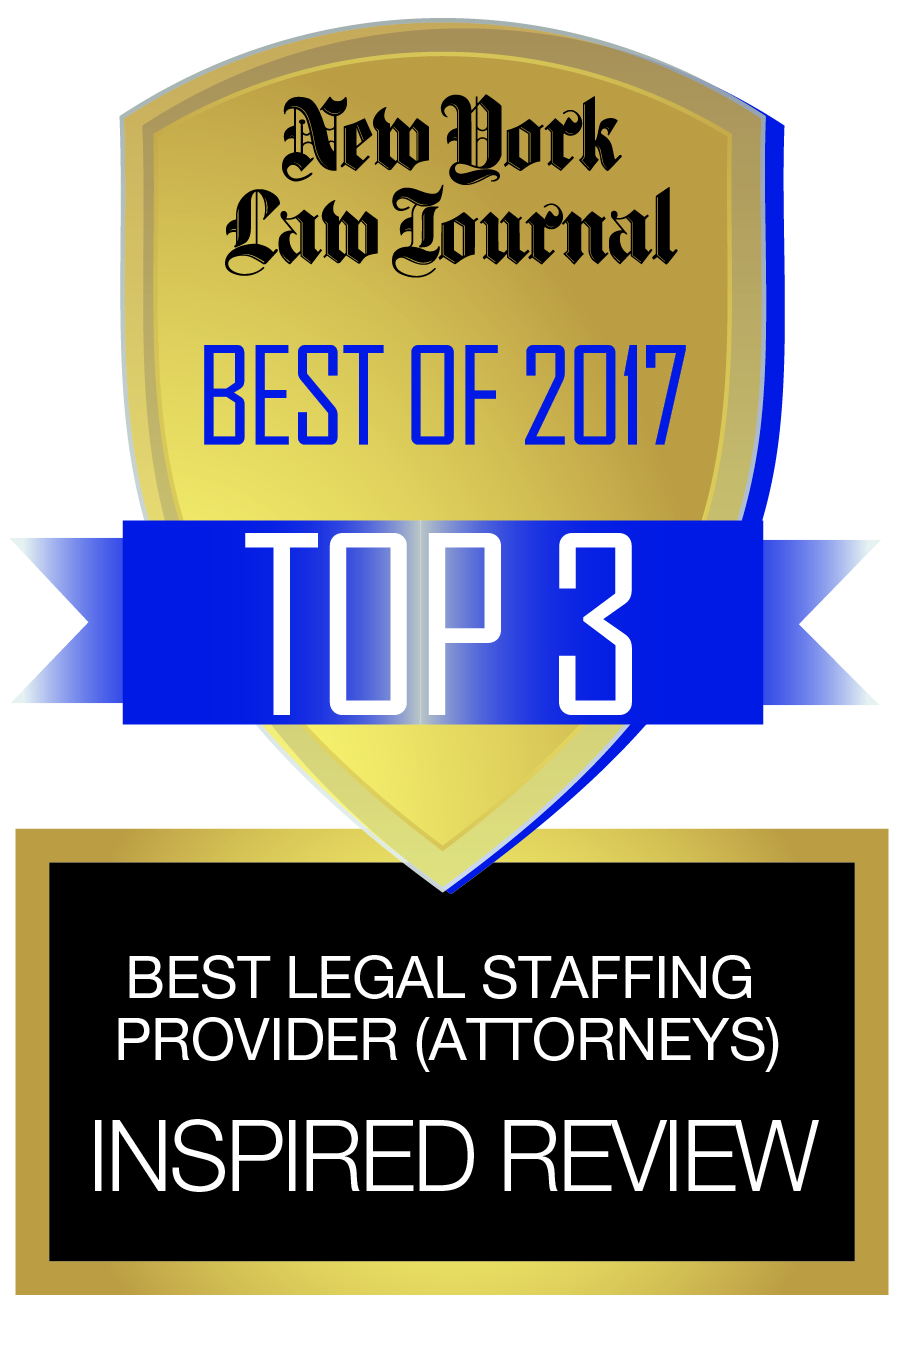 Top 3 2017 NYLJ Legal Staffing Firm